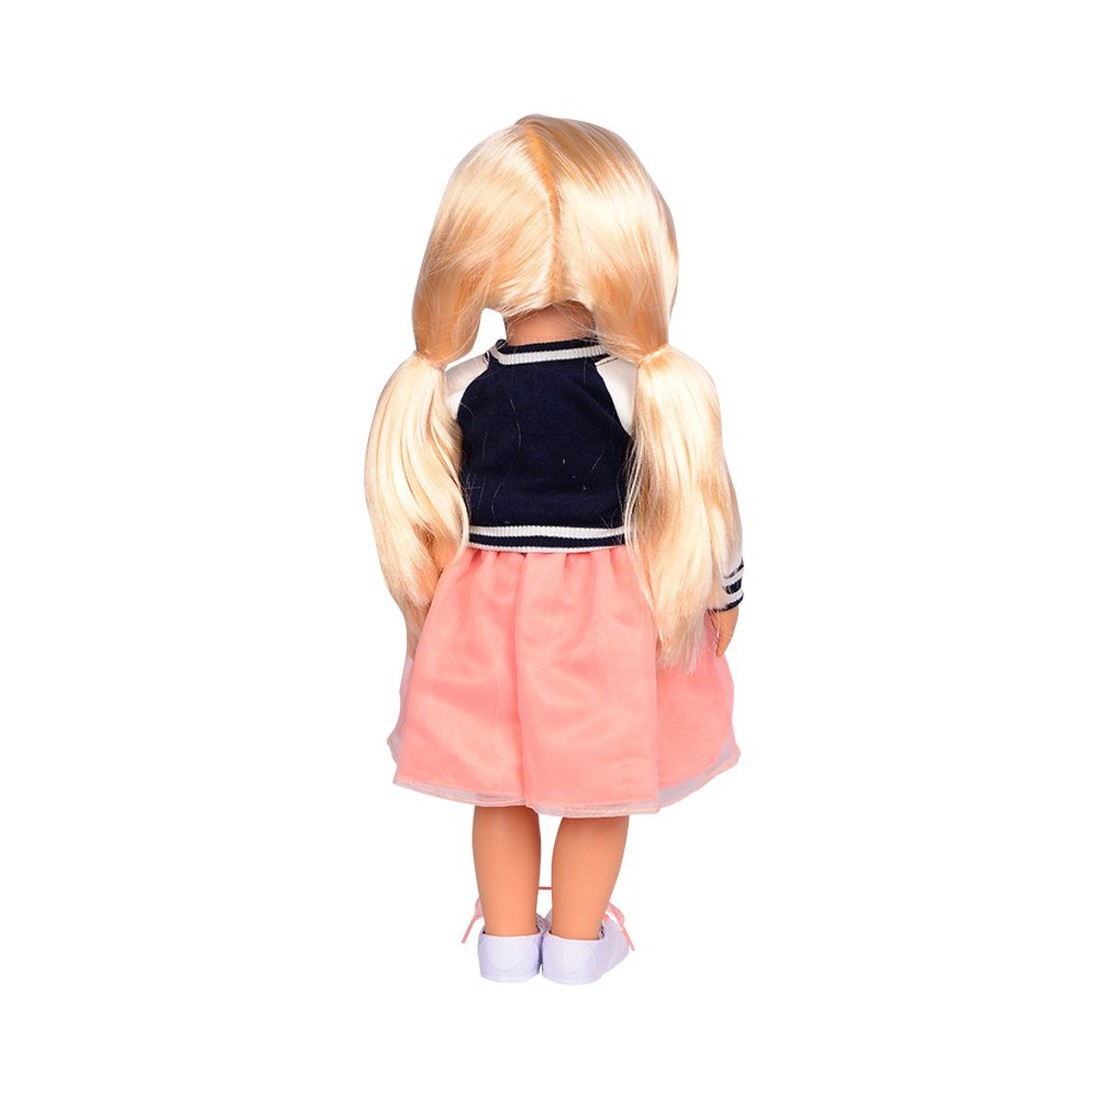 Shop Our Generation Terry-Retro Doll 18" Doll - Our Generation, delivered  to your home | TheOutfit